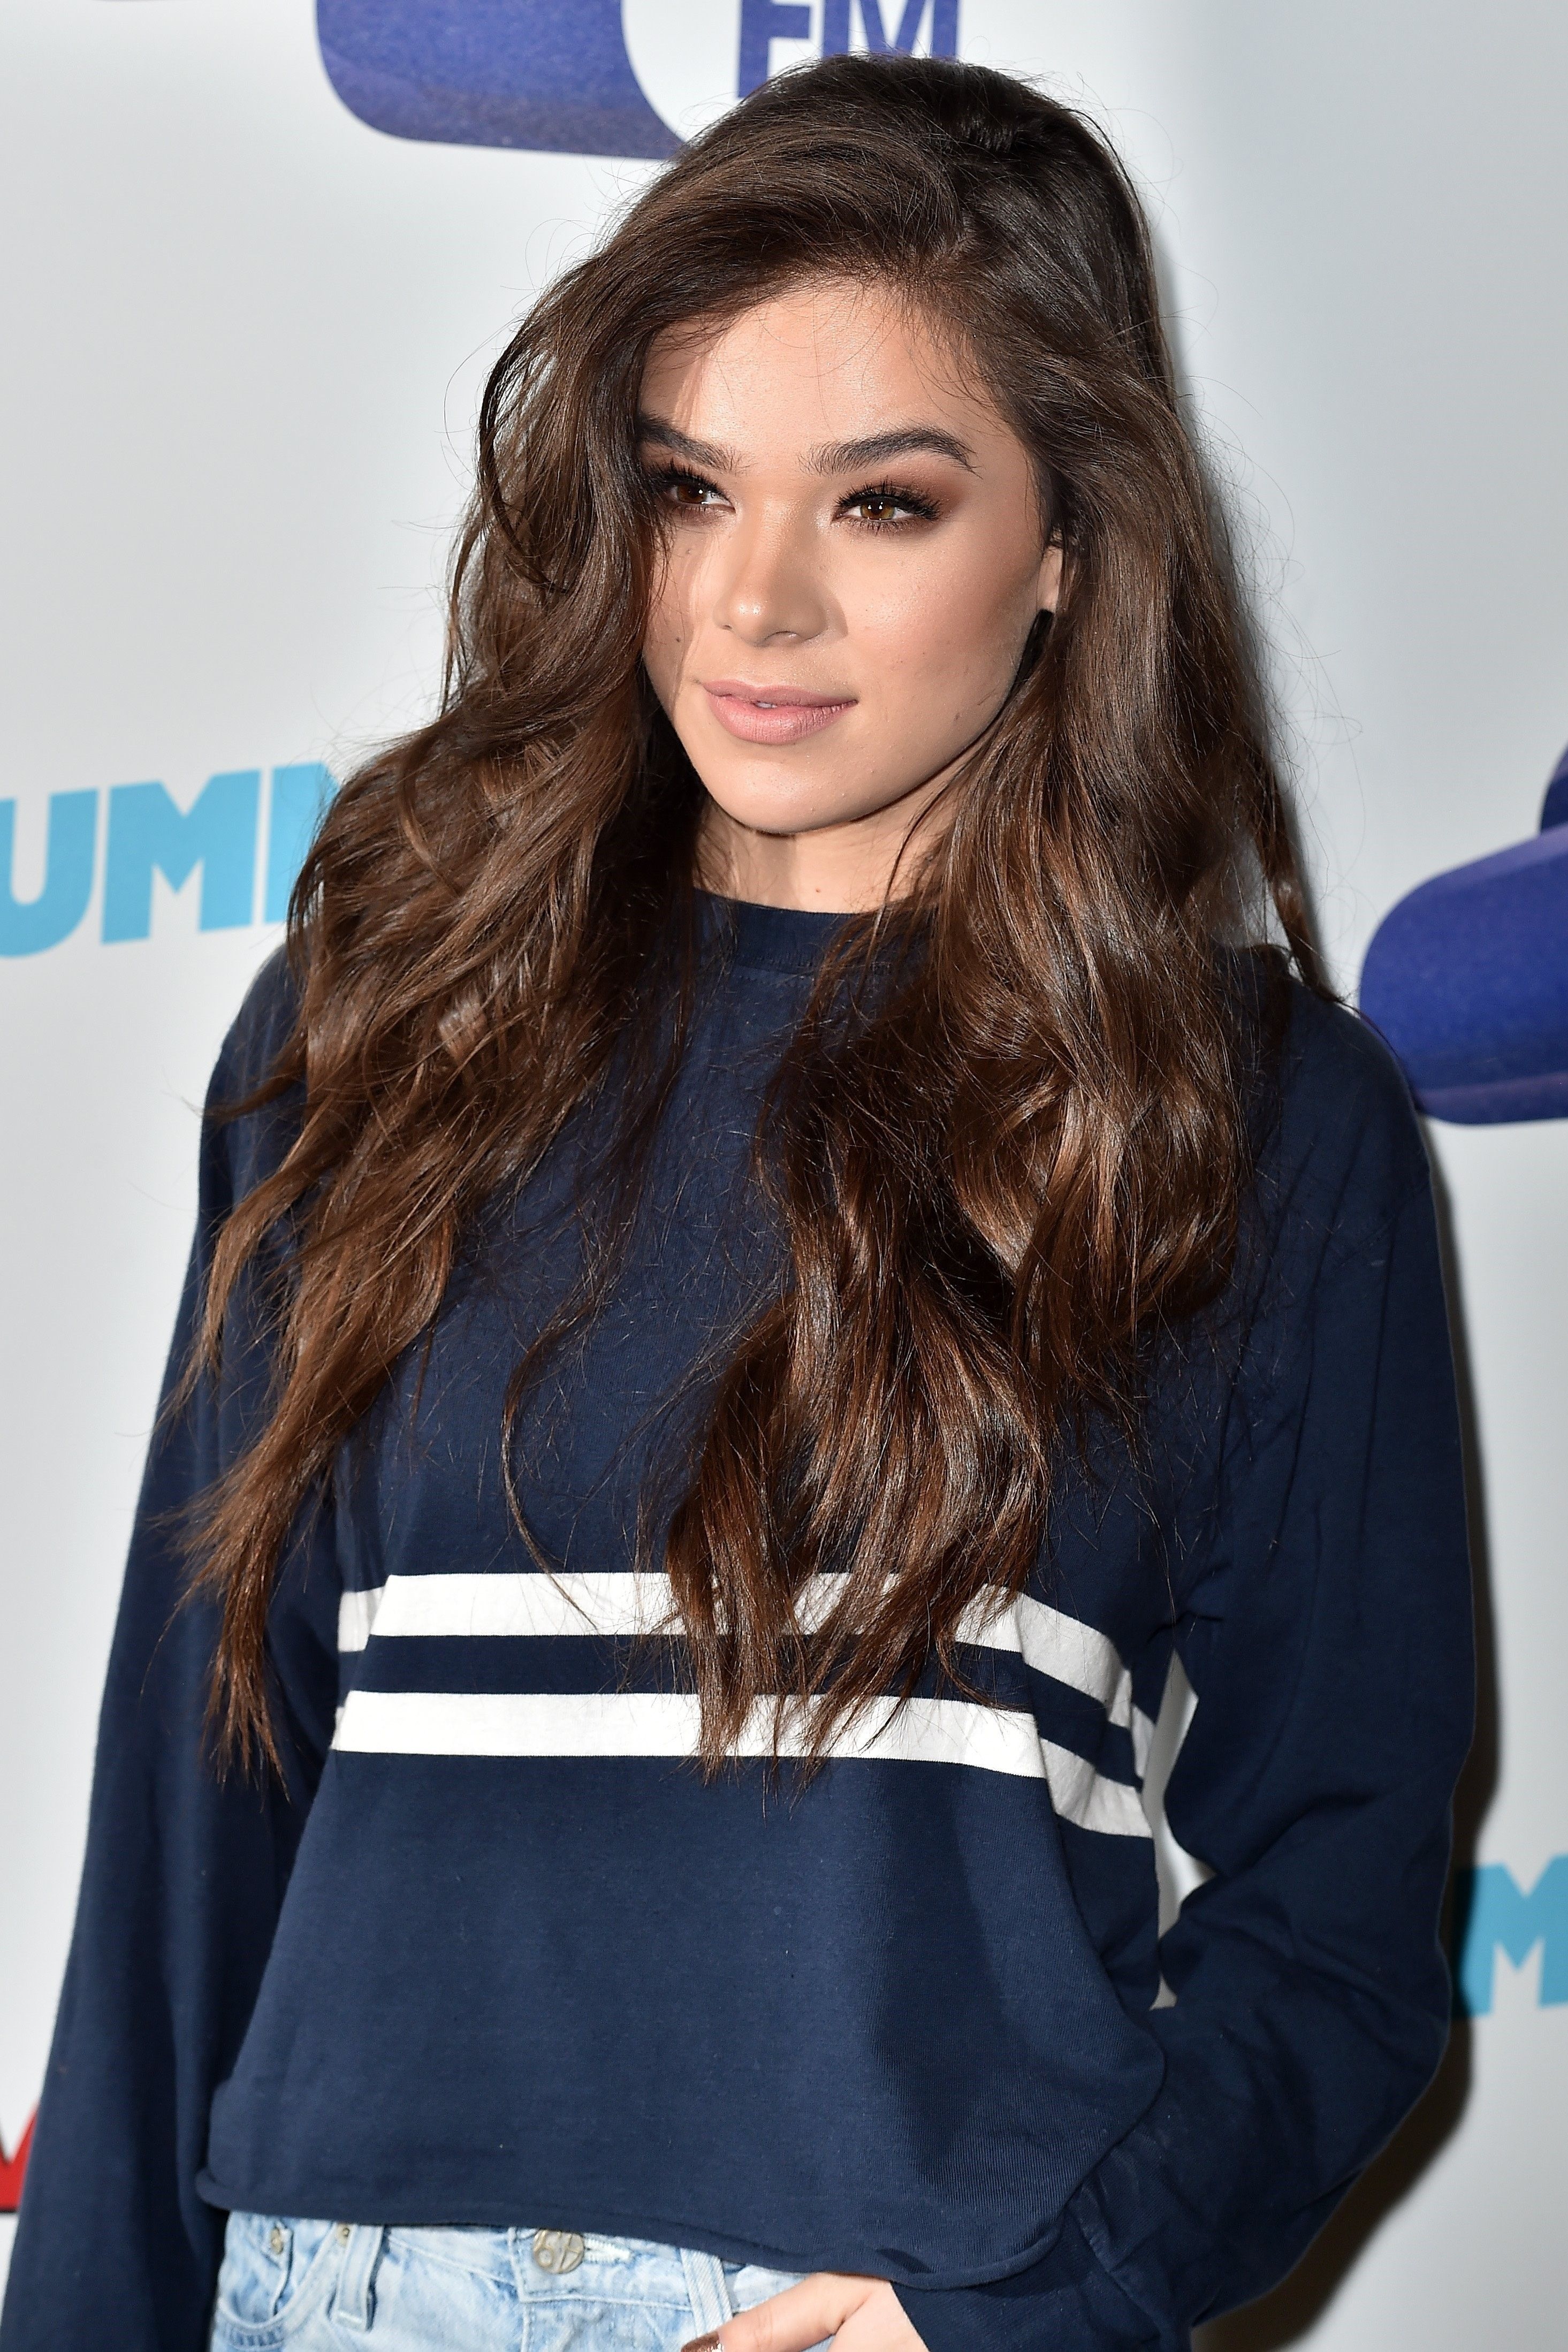 Hailee Steinfeld | Hollywood Actress